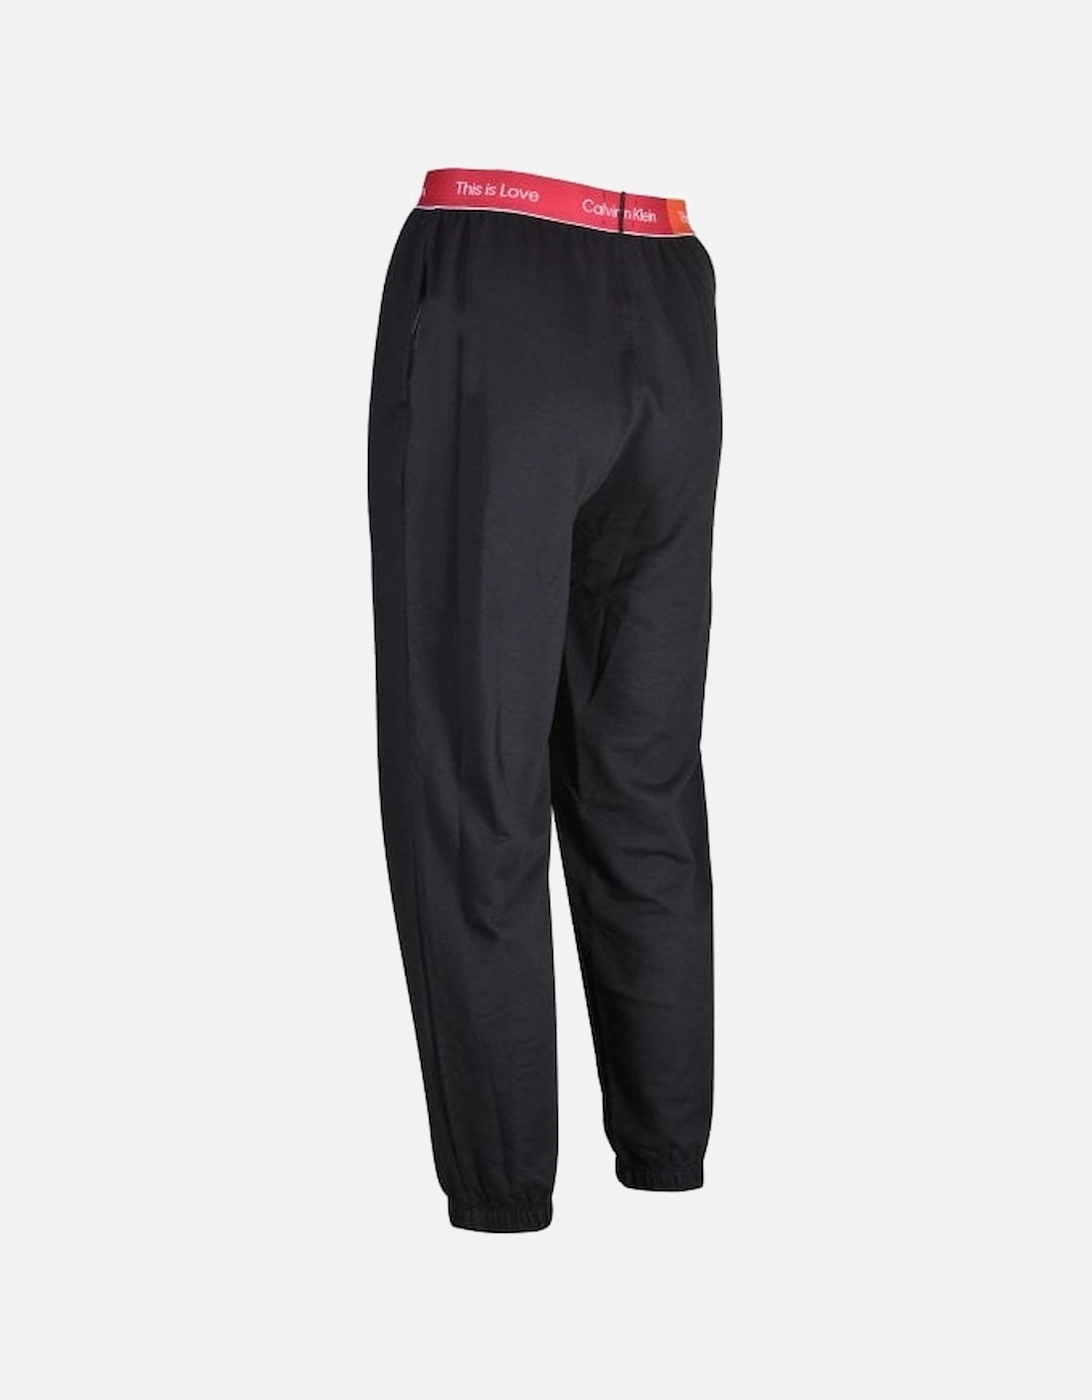 This Is Love Lounge Jogging Bottoms, Black